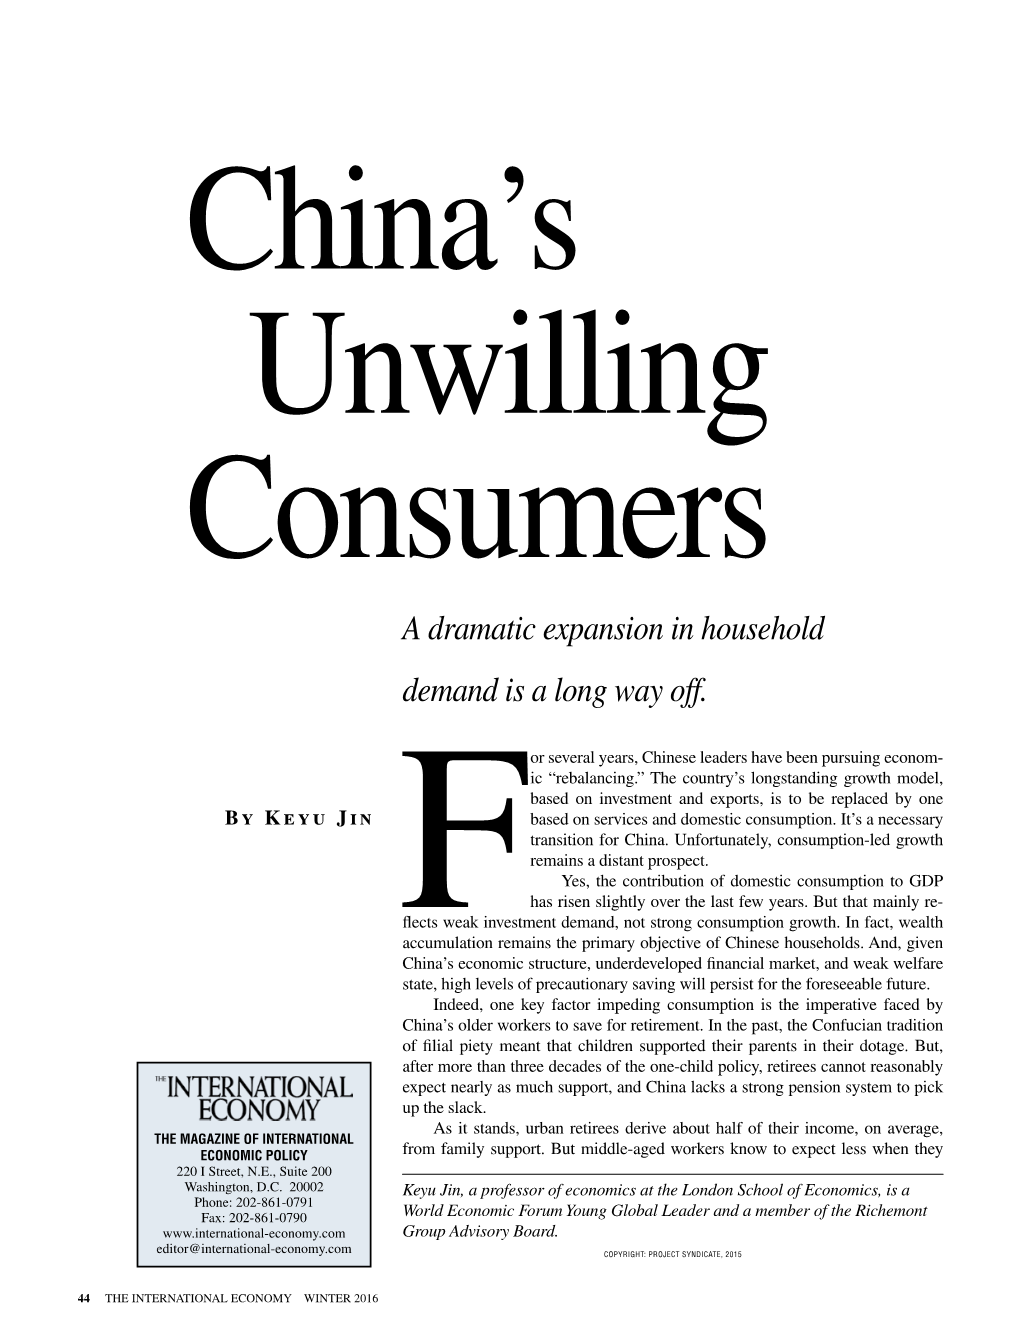 China's Unwilling Consumers